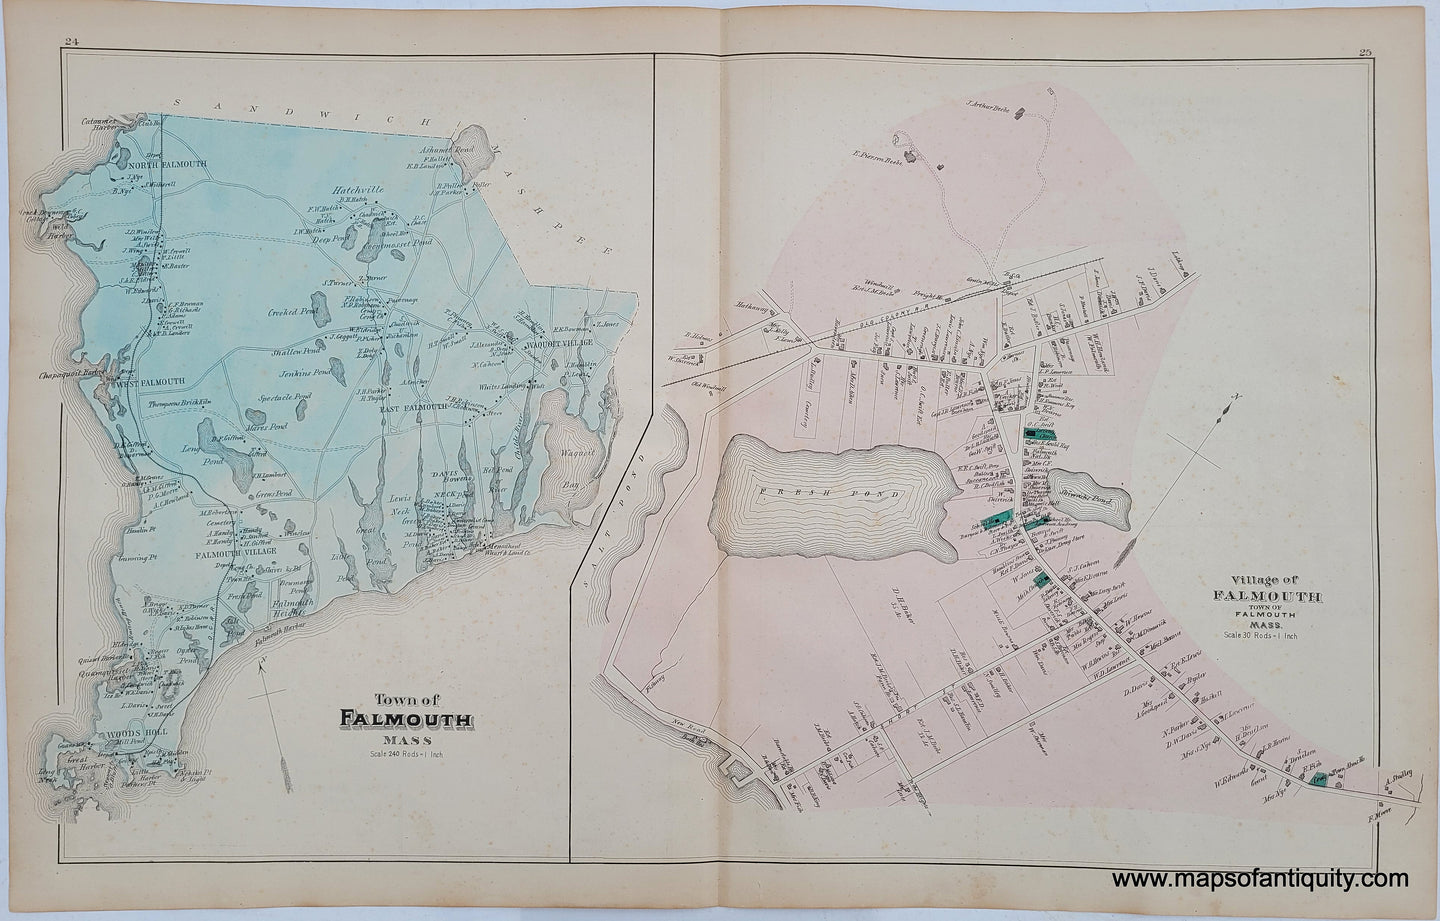 Antique map with the Town of Falmouth on the left colored in light blue and the Village of Falmouth, Massachusetts, on the right, colored in a light pink. On the village map, the parks and cemeteries are a bright green. All color is original. 